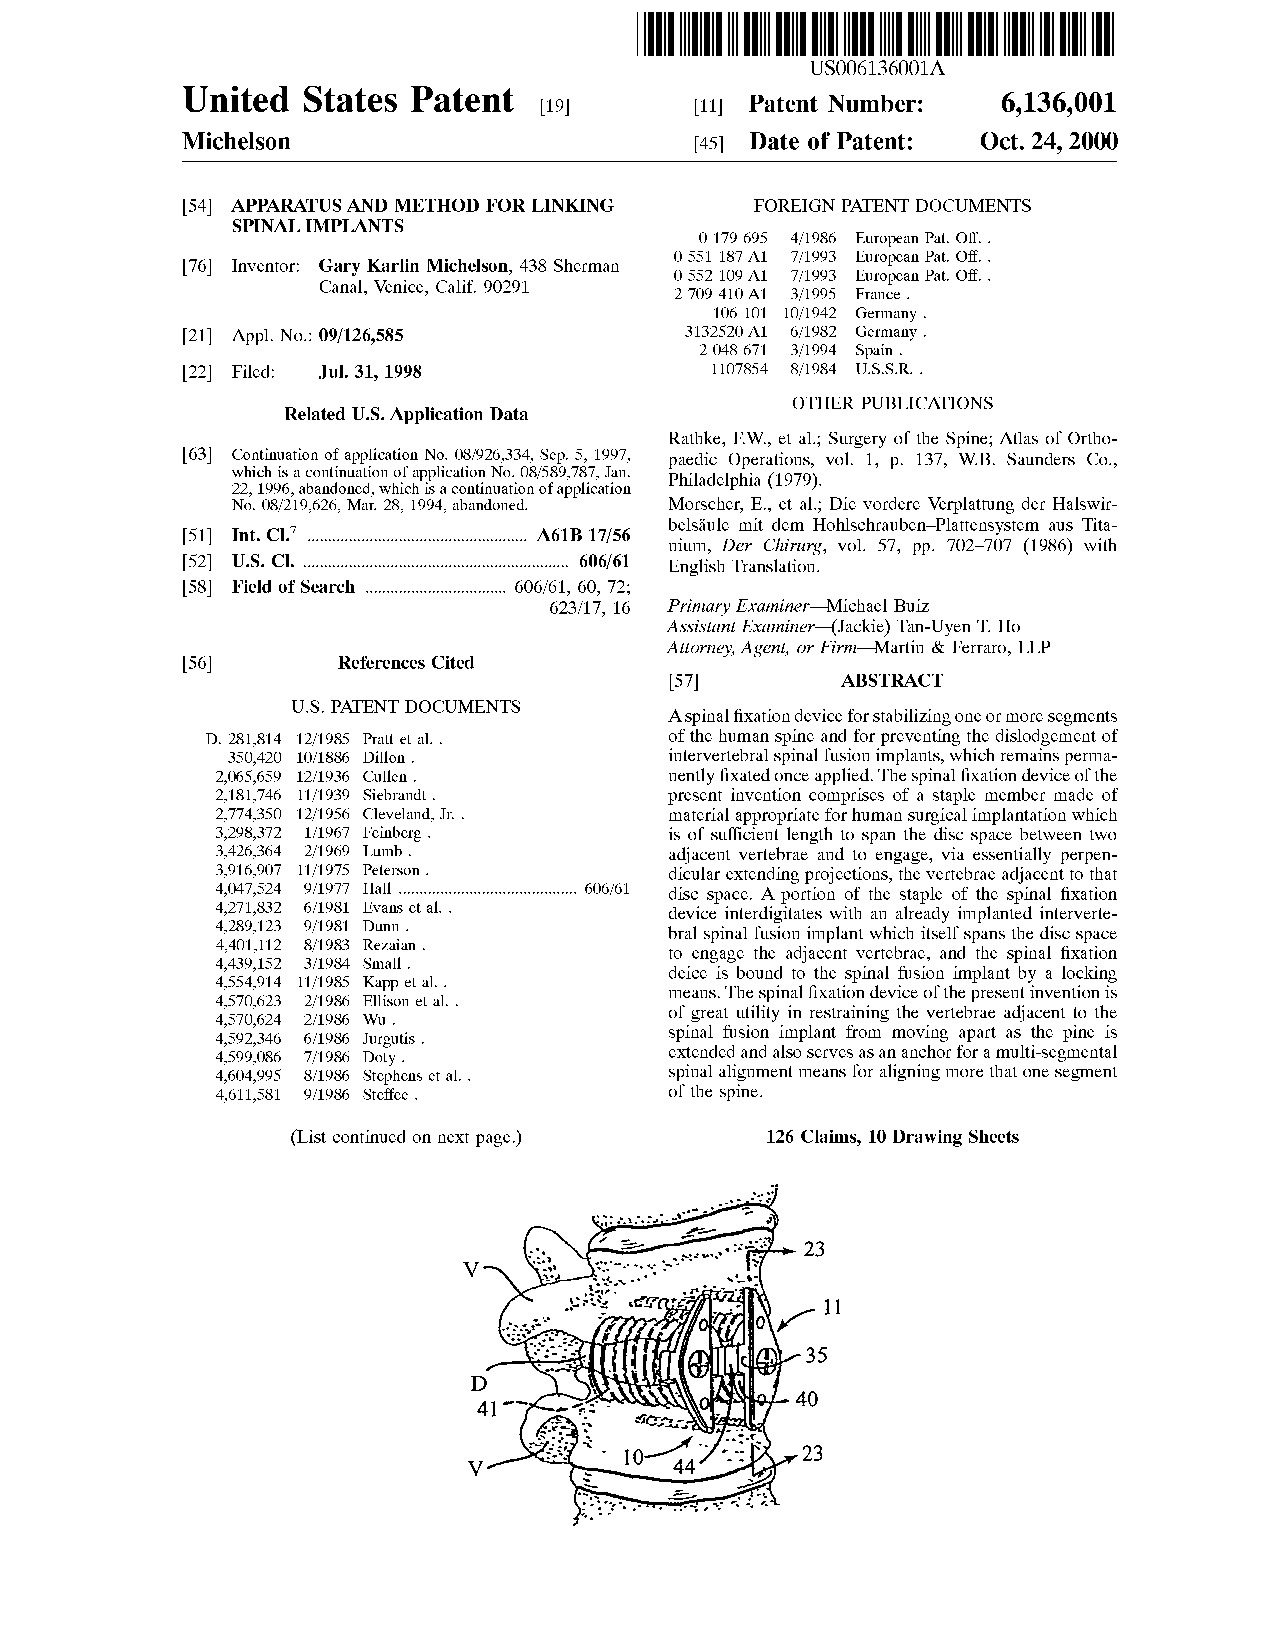 Apparatus and method for linking spinal implants - Patent 6,136,001